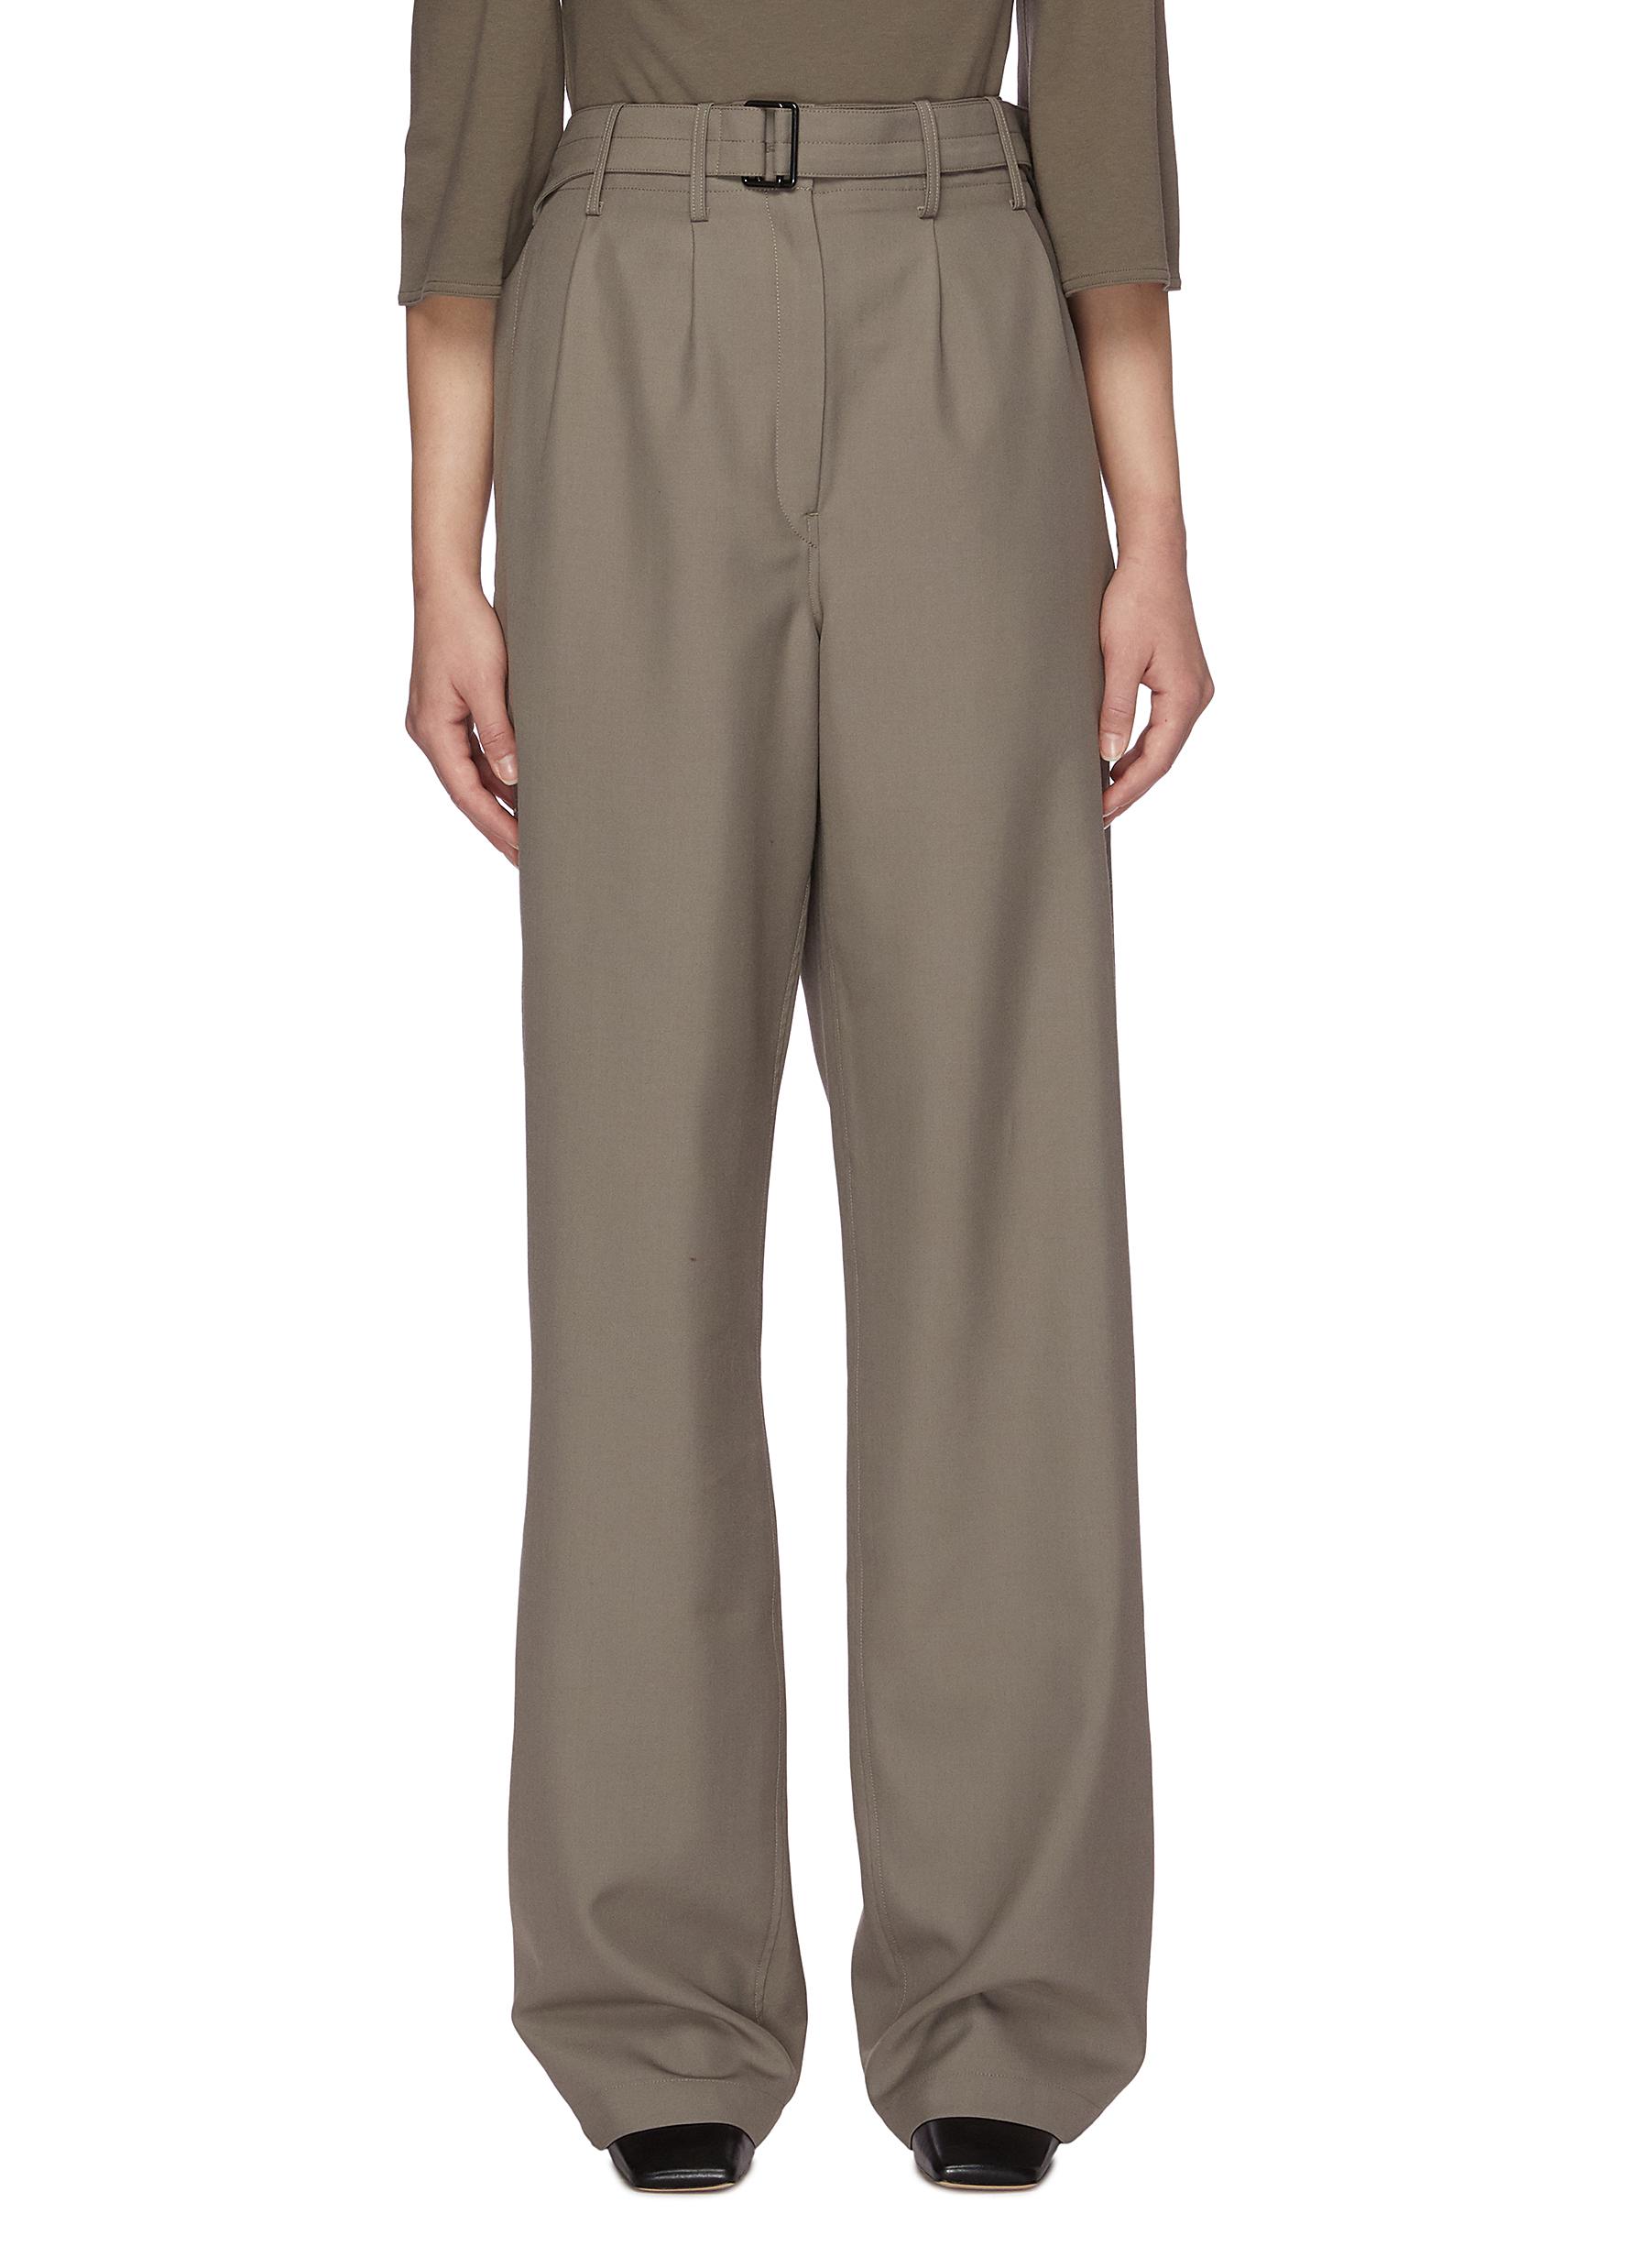 Belted drop crotch suiting pants